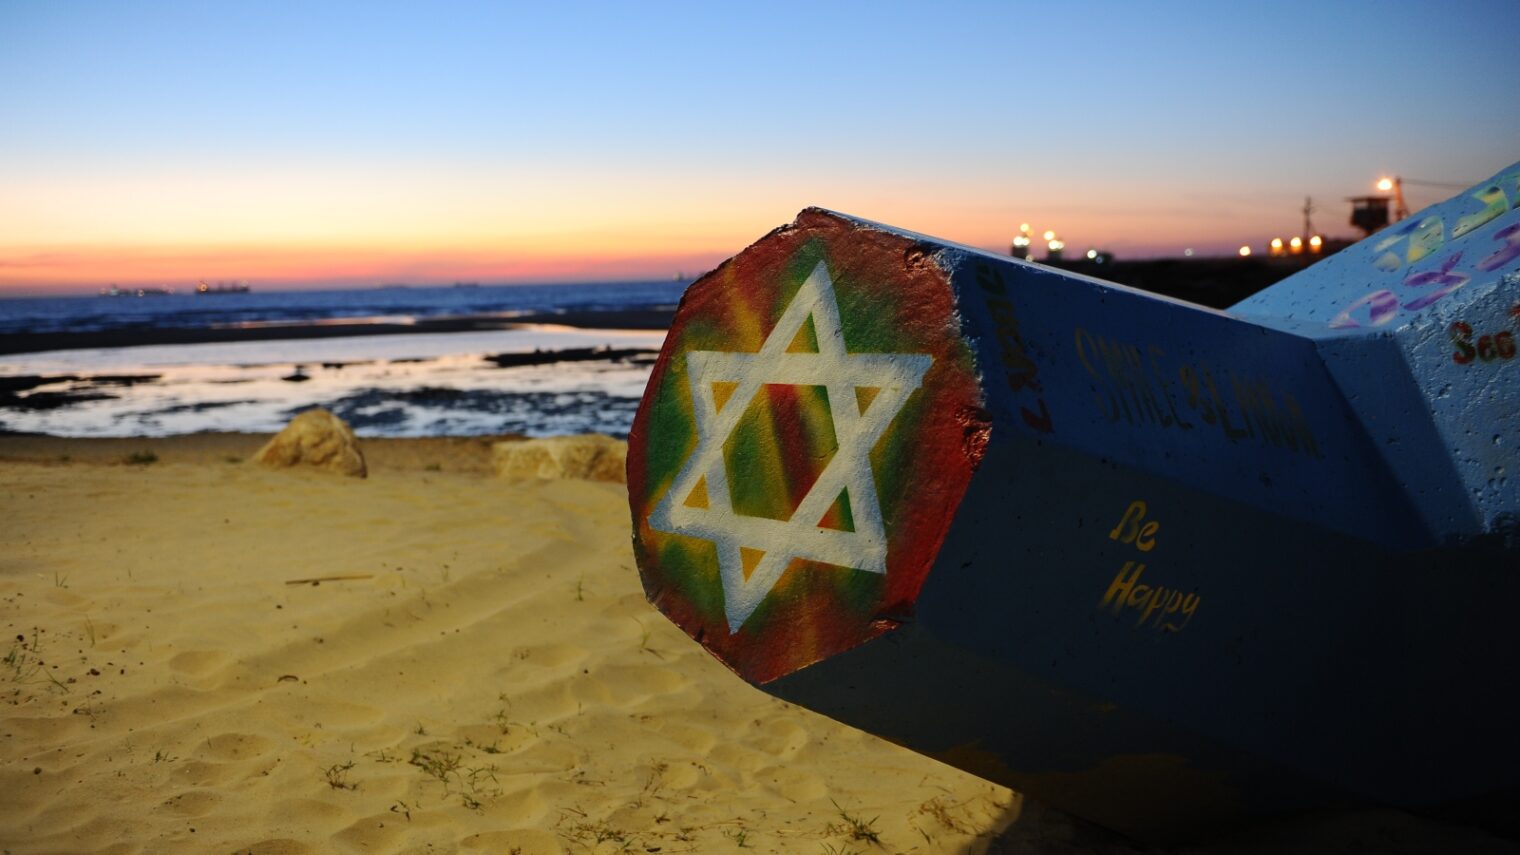 A Mediterranean sunset in the southern Israeli city of Ashdod, May 13, 2019. Photo by Mendy Hechtman/Flash90